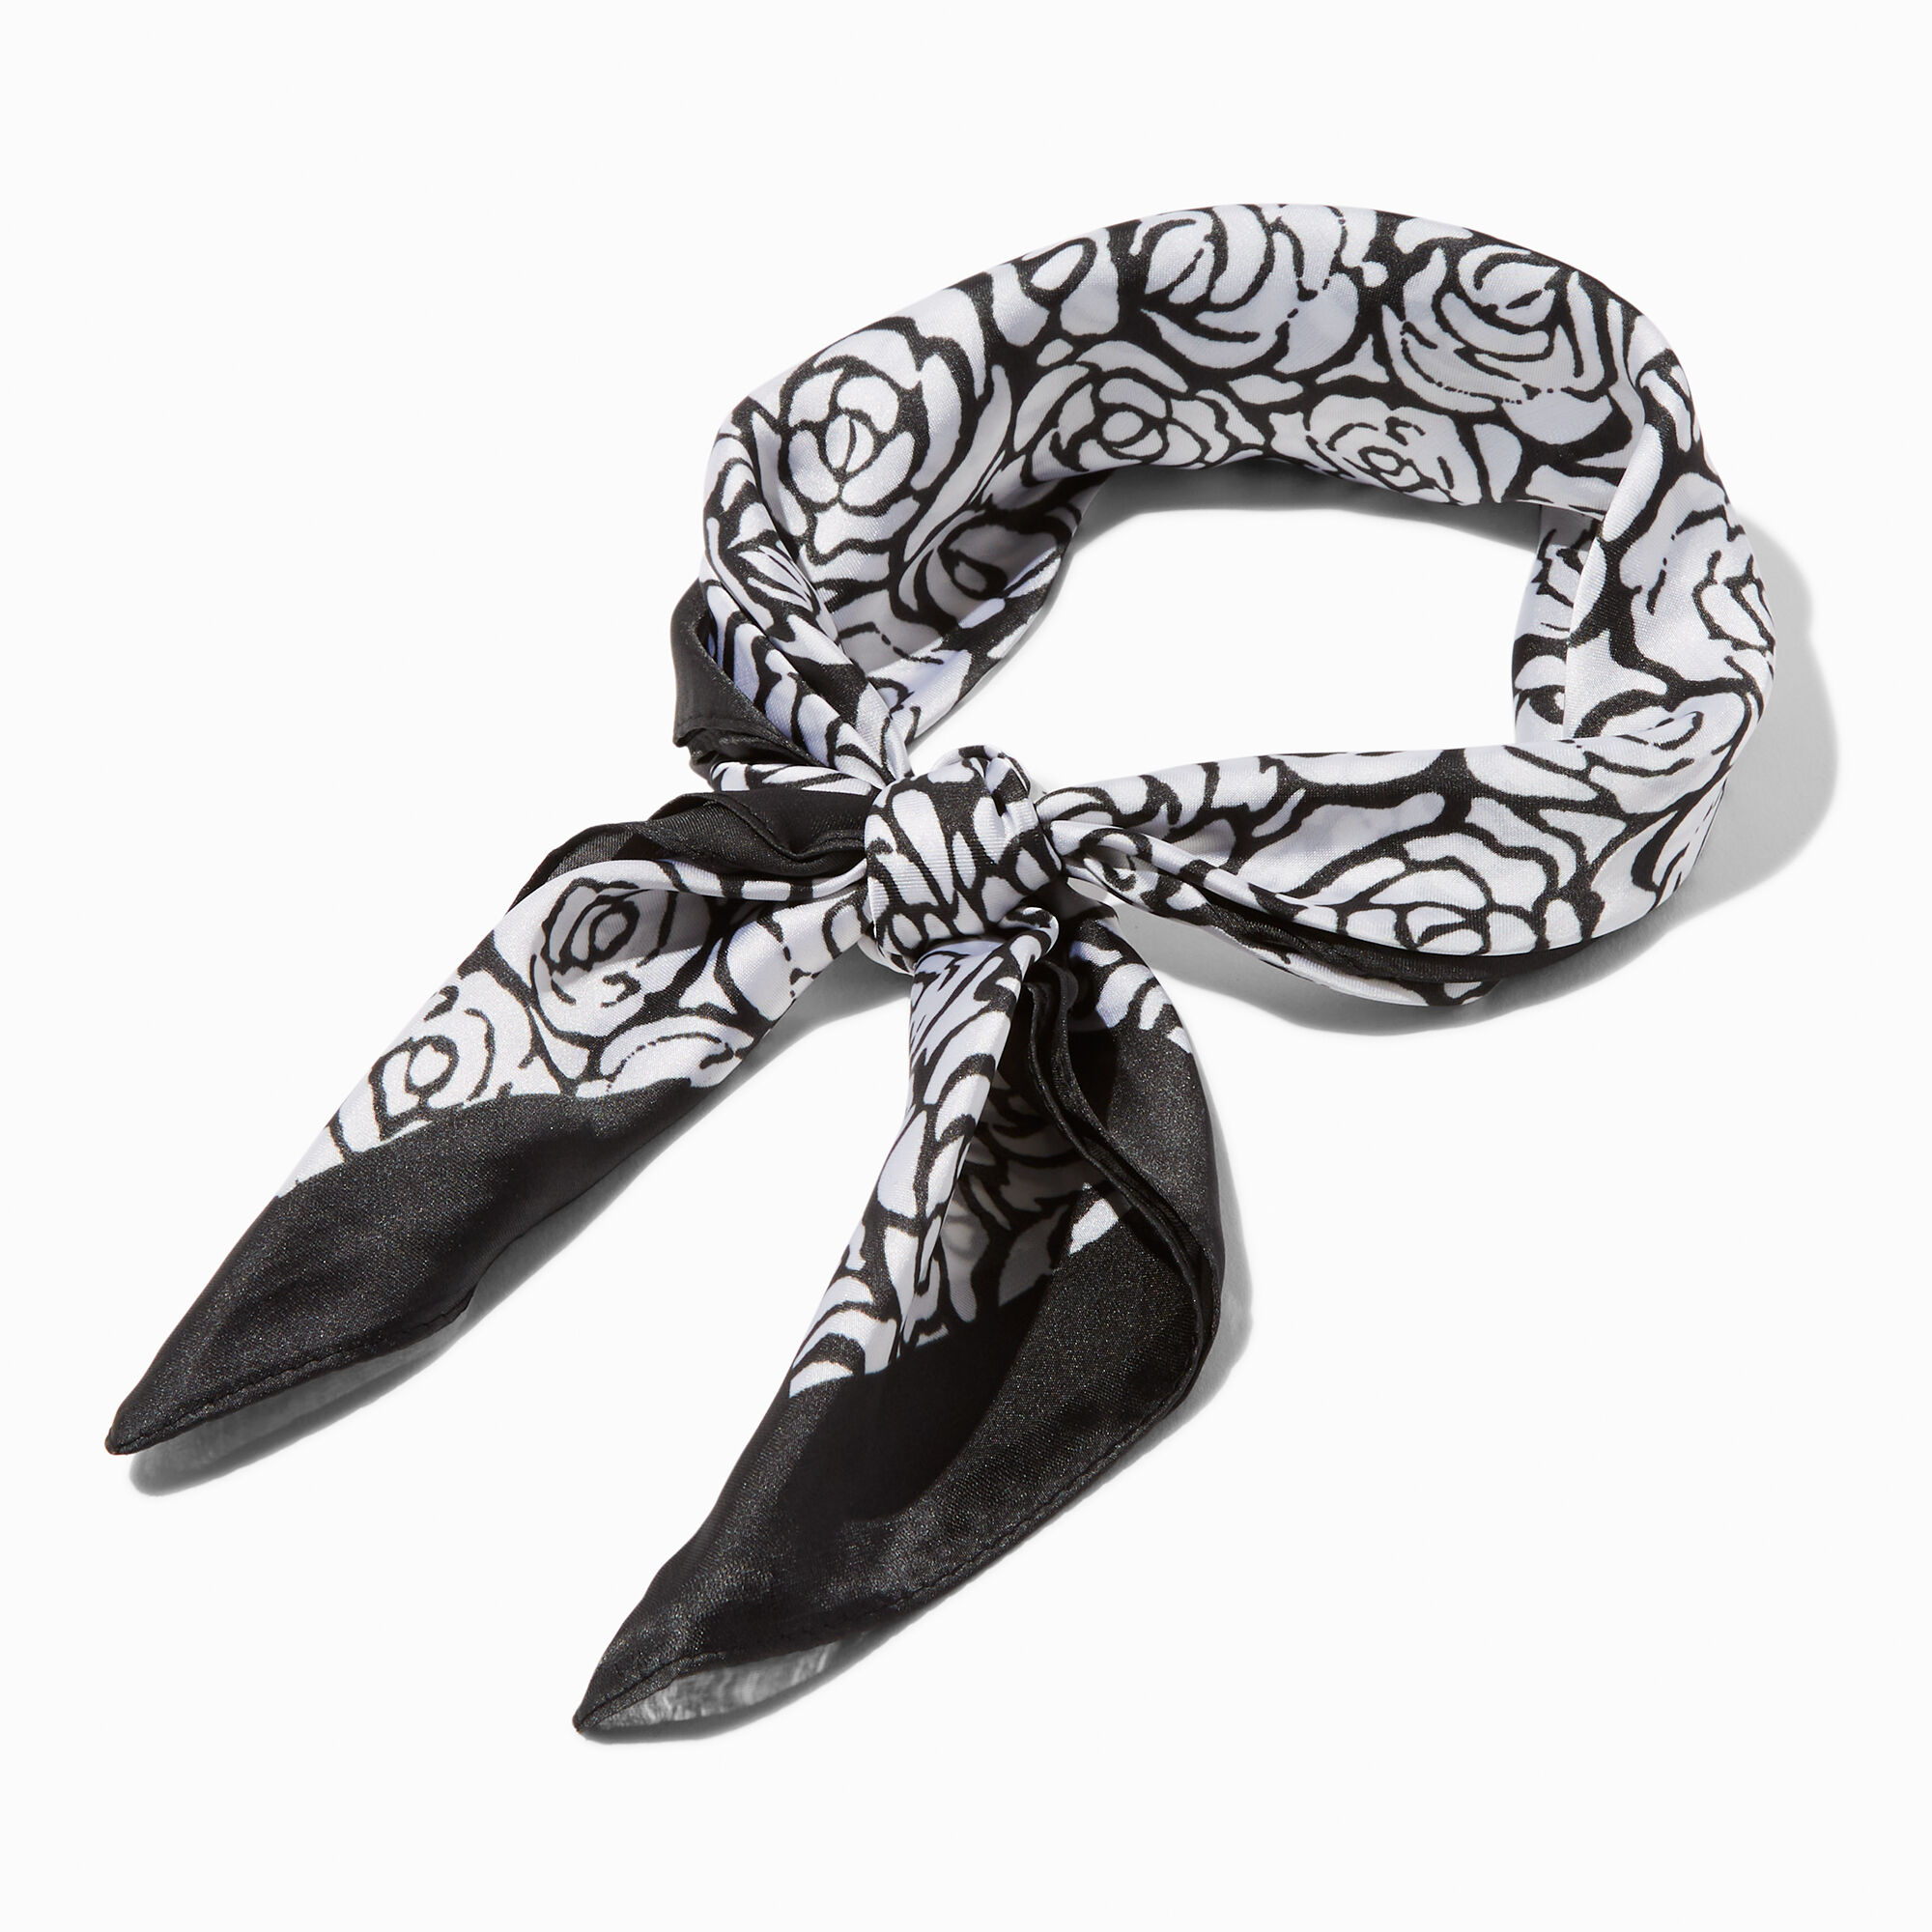 View Claires Black And Silky Roses Headwrap White information